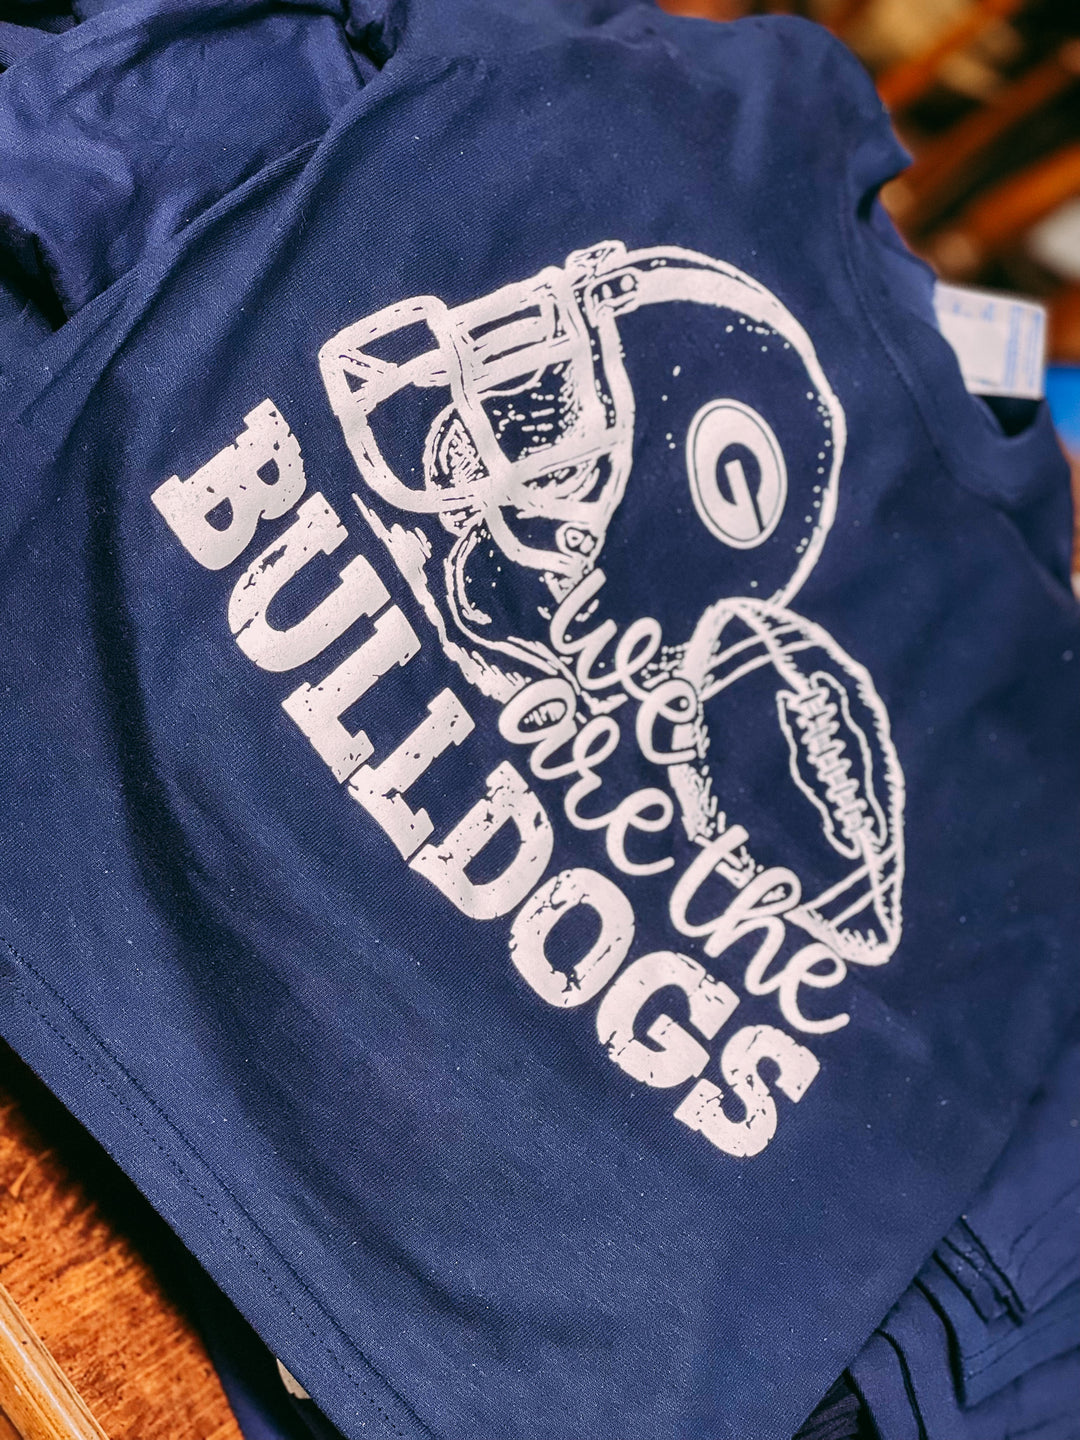 We Are The Bulldogs Navy Dri-Fit Shirt